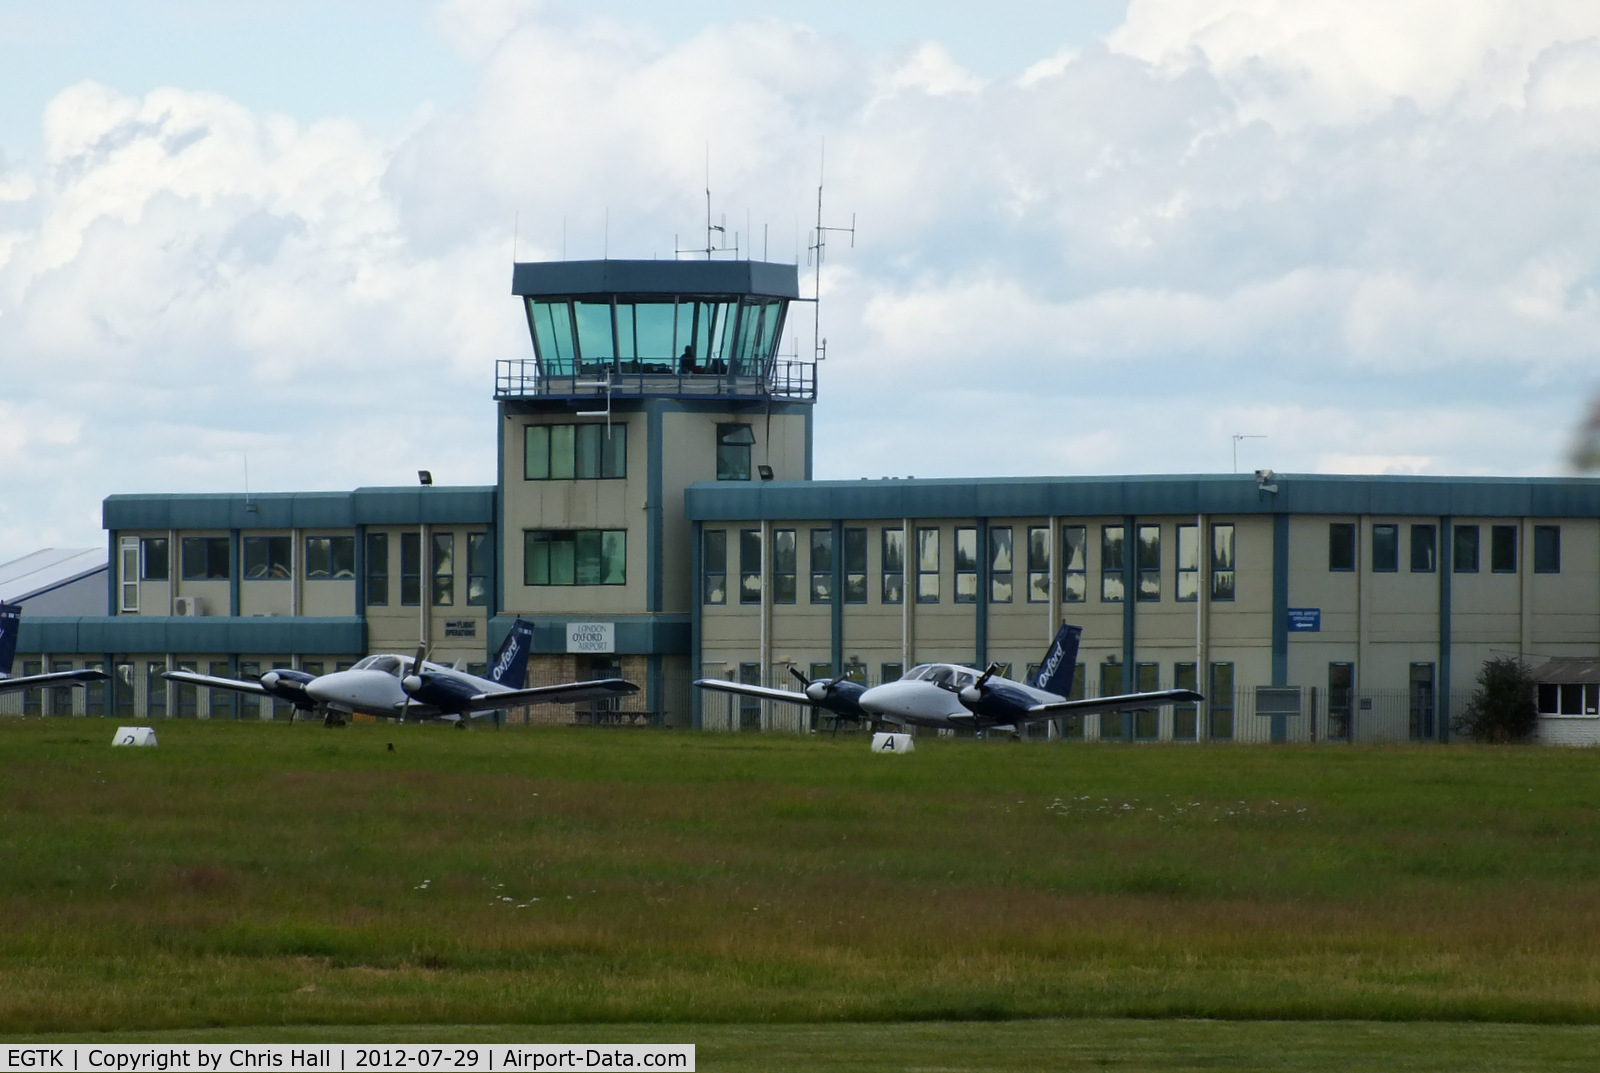 Oxford Airport, Oxford, England United Kingdom (EGTK) - Oxford tower and Terminal building